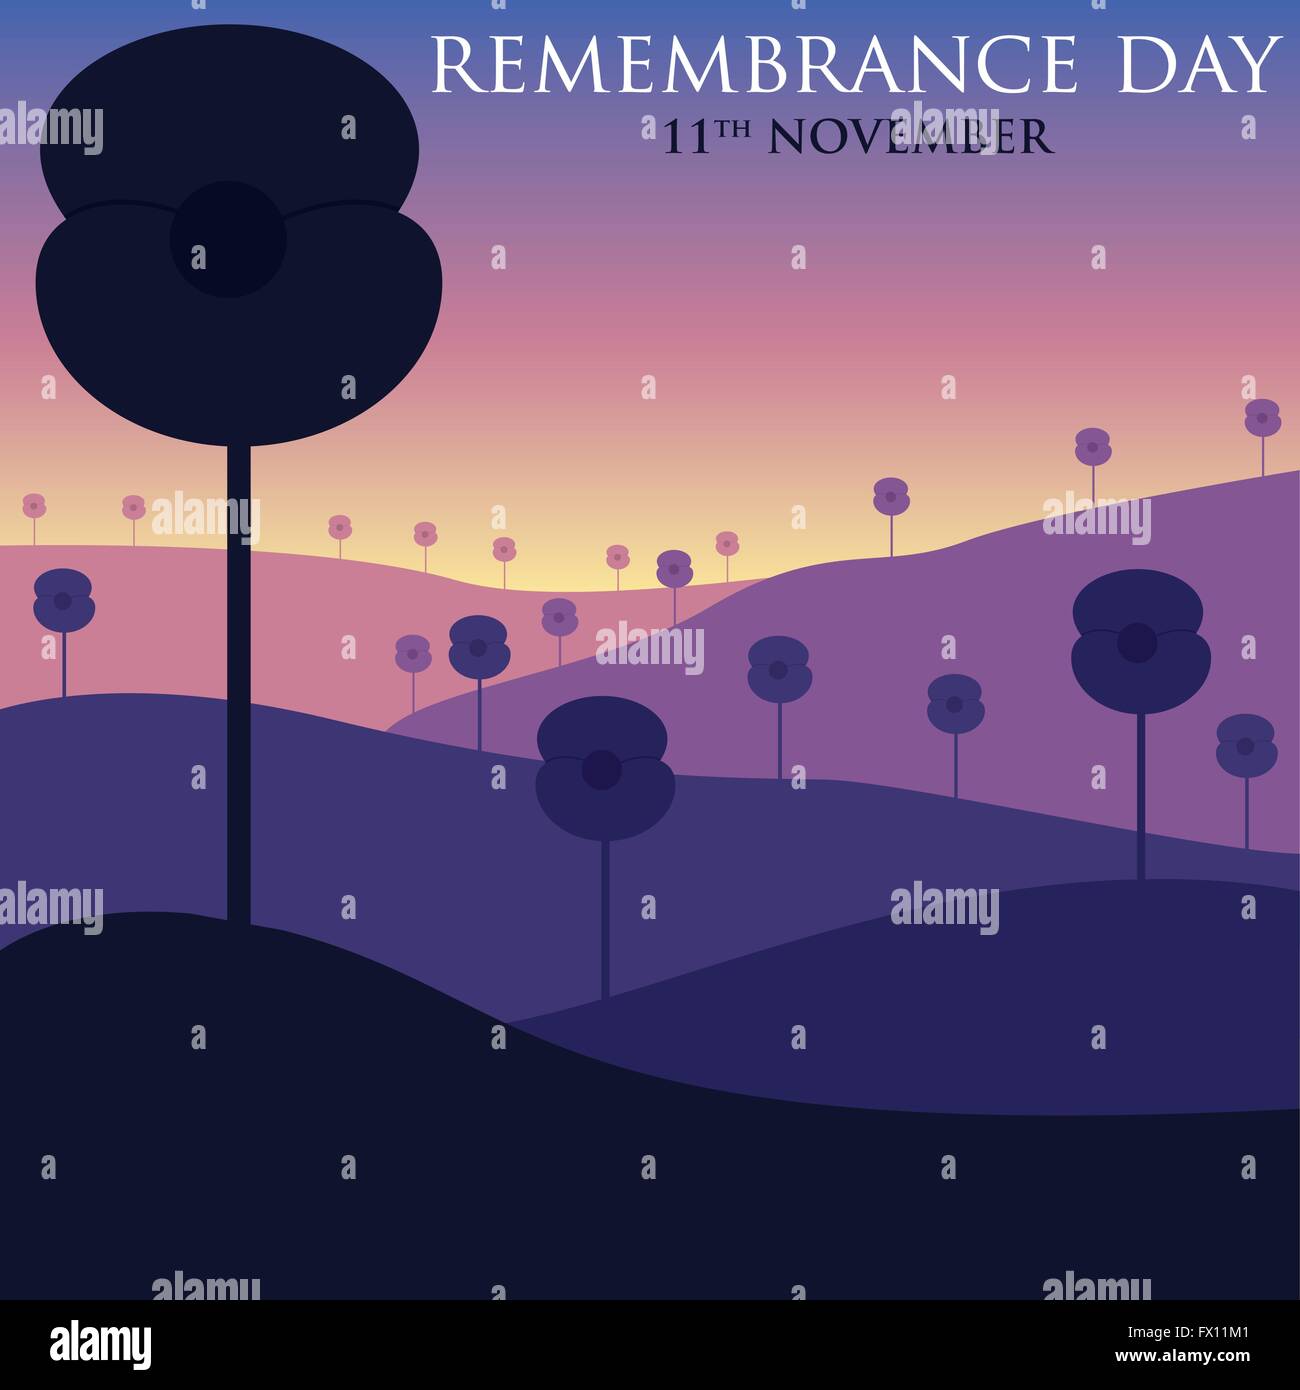 Remembrance Day card in vector format. Stock Vector